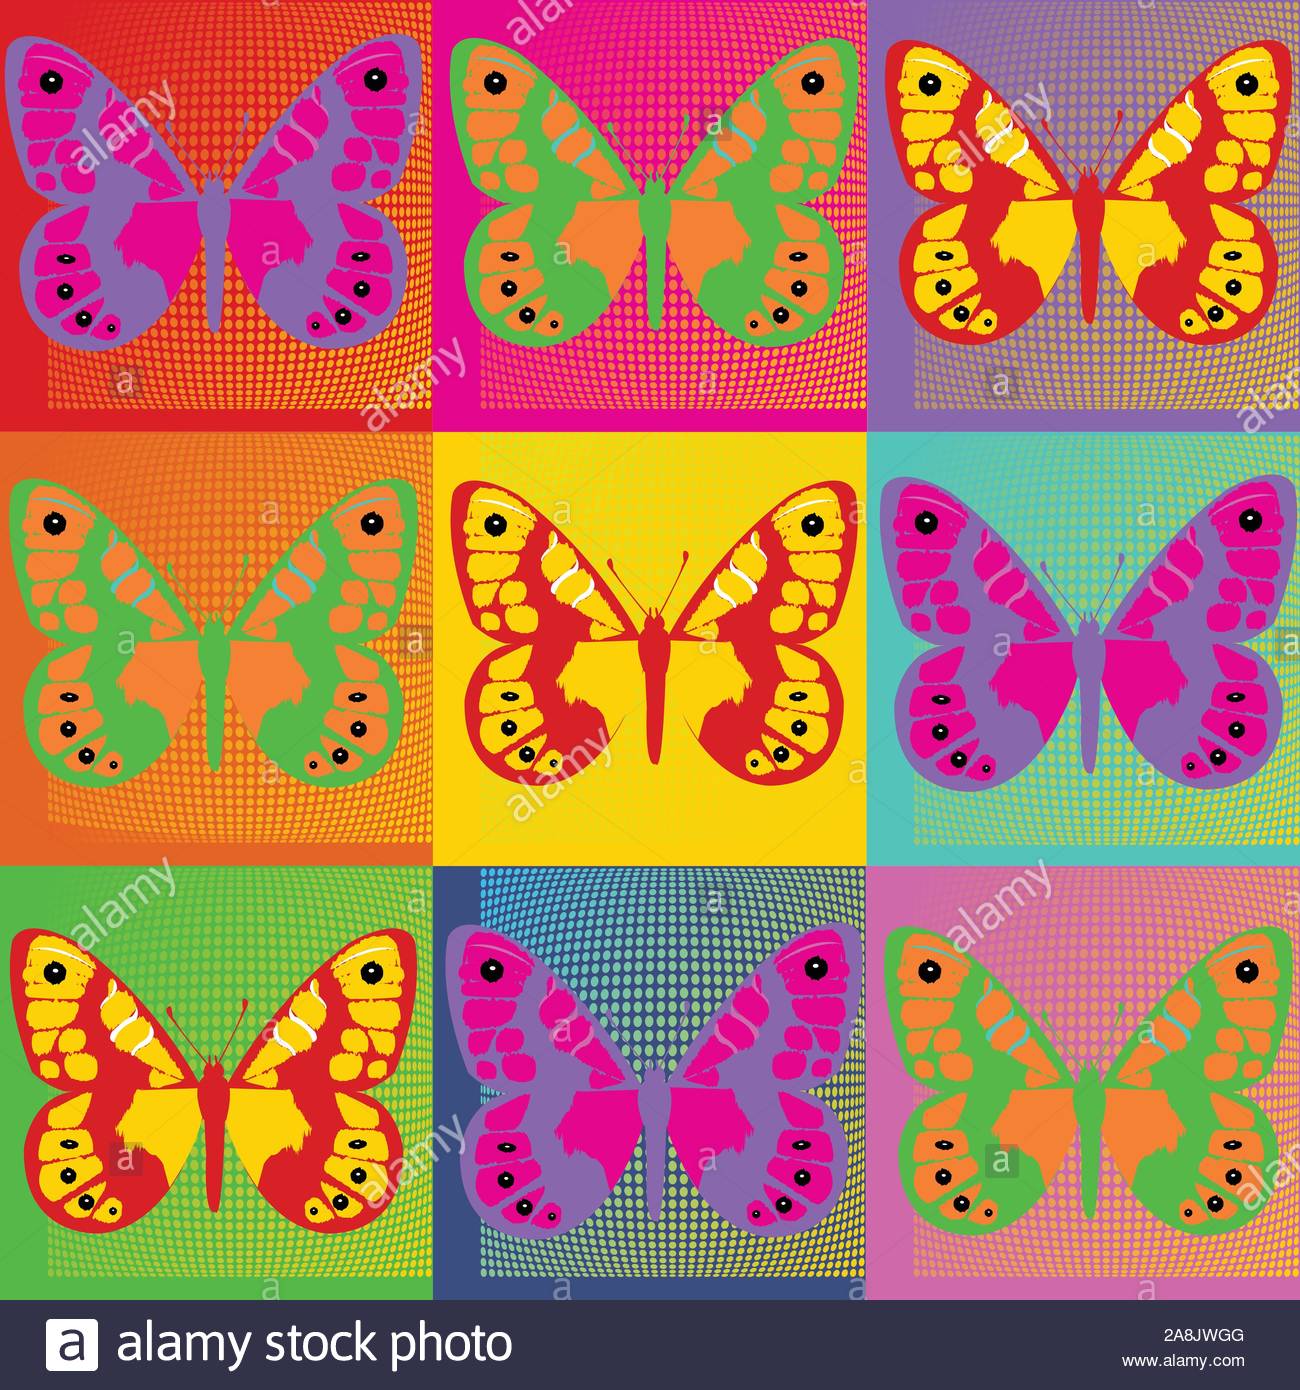 Pop Art Andy Warhol Background Illustration With Butterflies